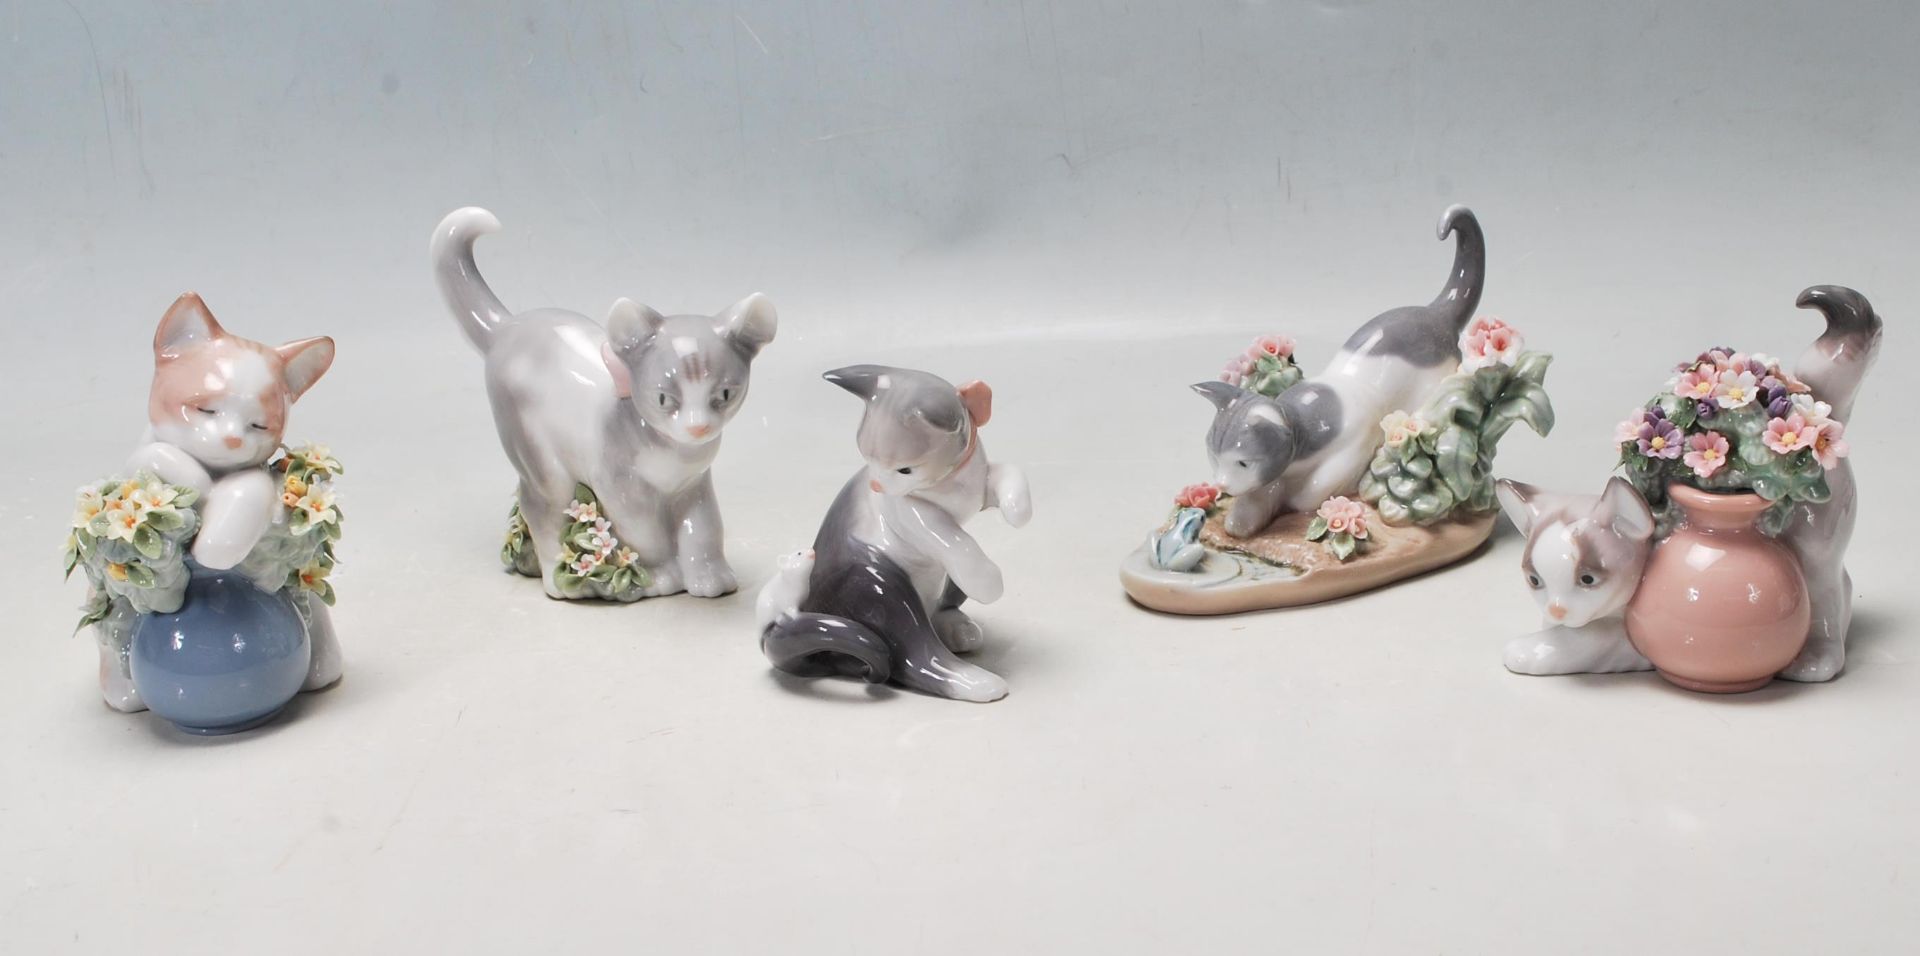 A COLLECTION OF LLADRO FIGURINES IN THE FORM OF CATS PLAYING.